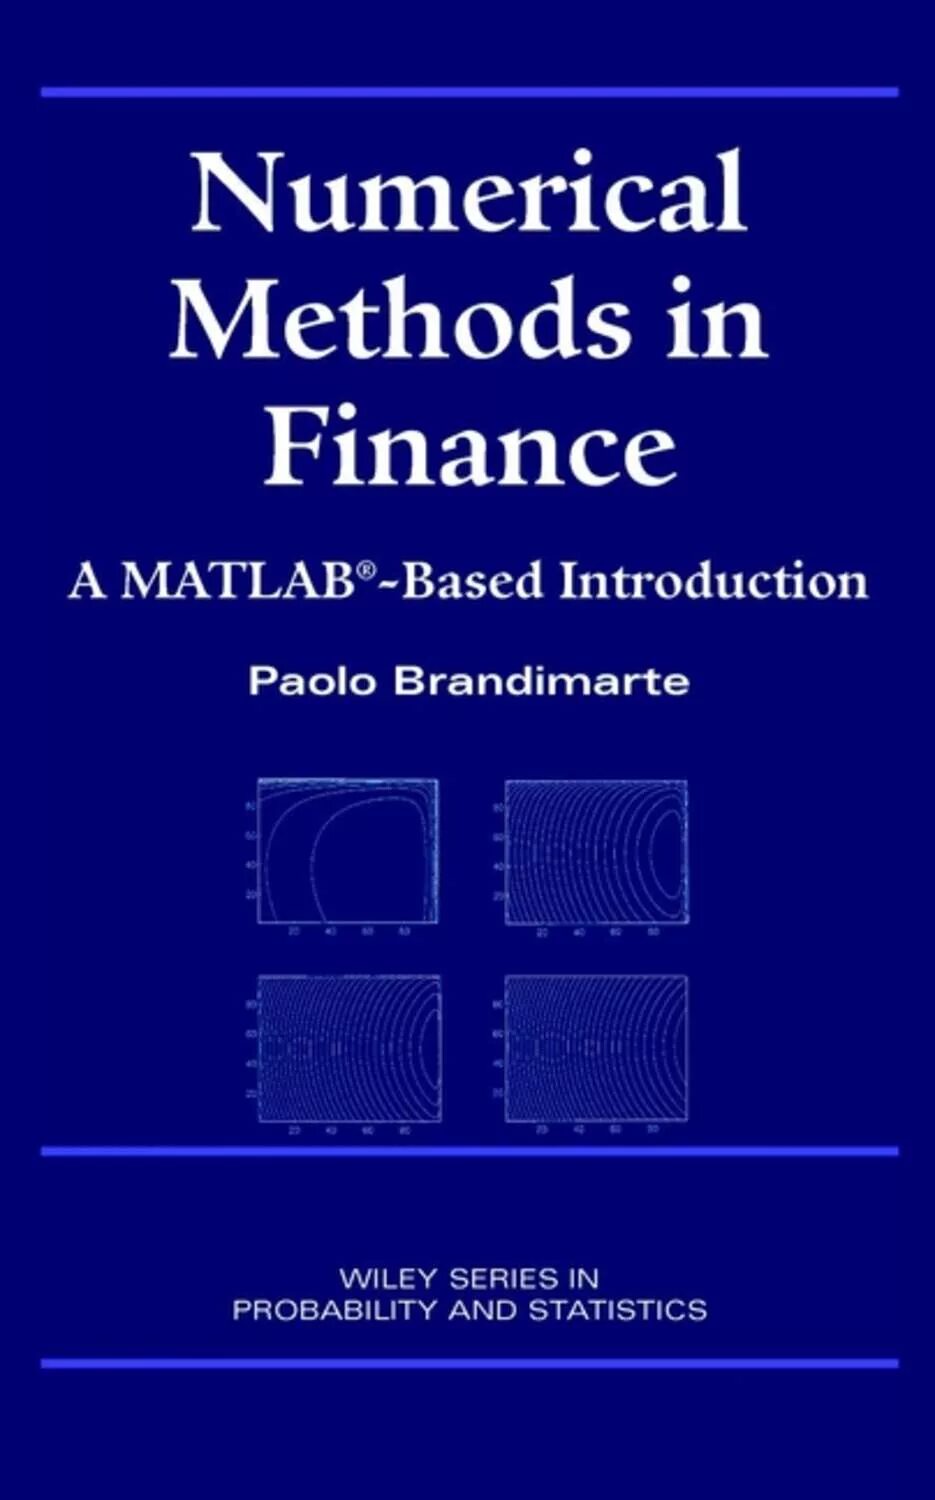 Matlab numerical methods. Numerical methods in reliability. Numerical methods and Thermophysics. Numerical methods